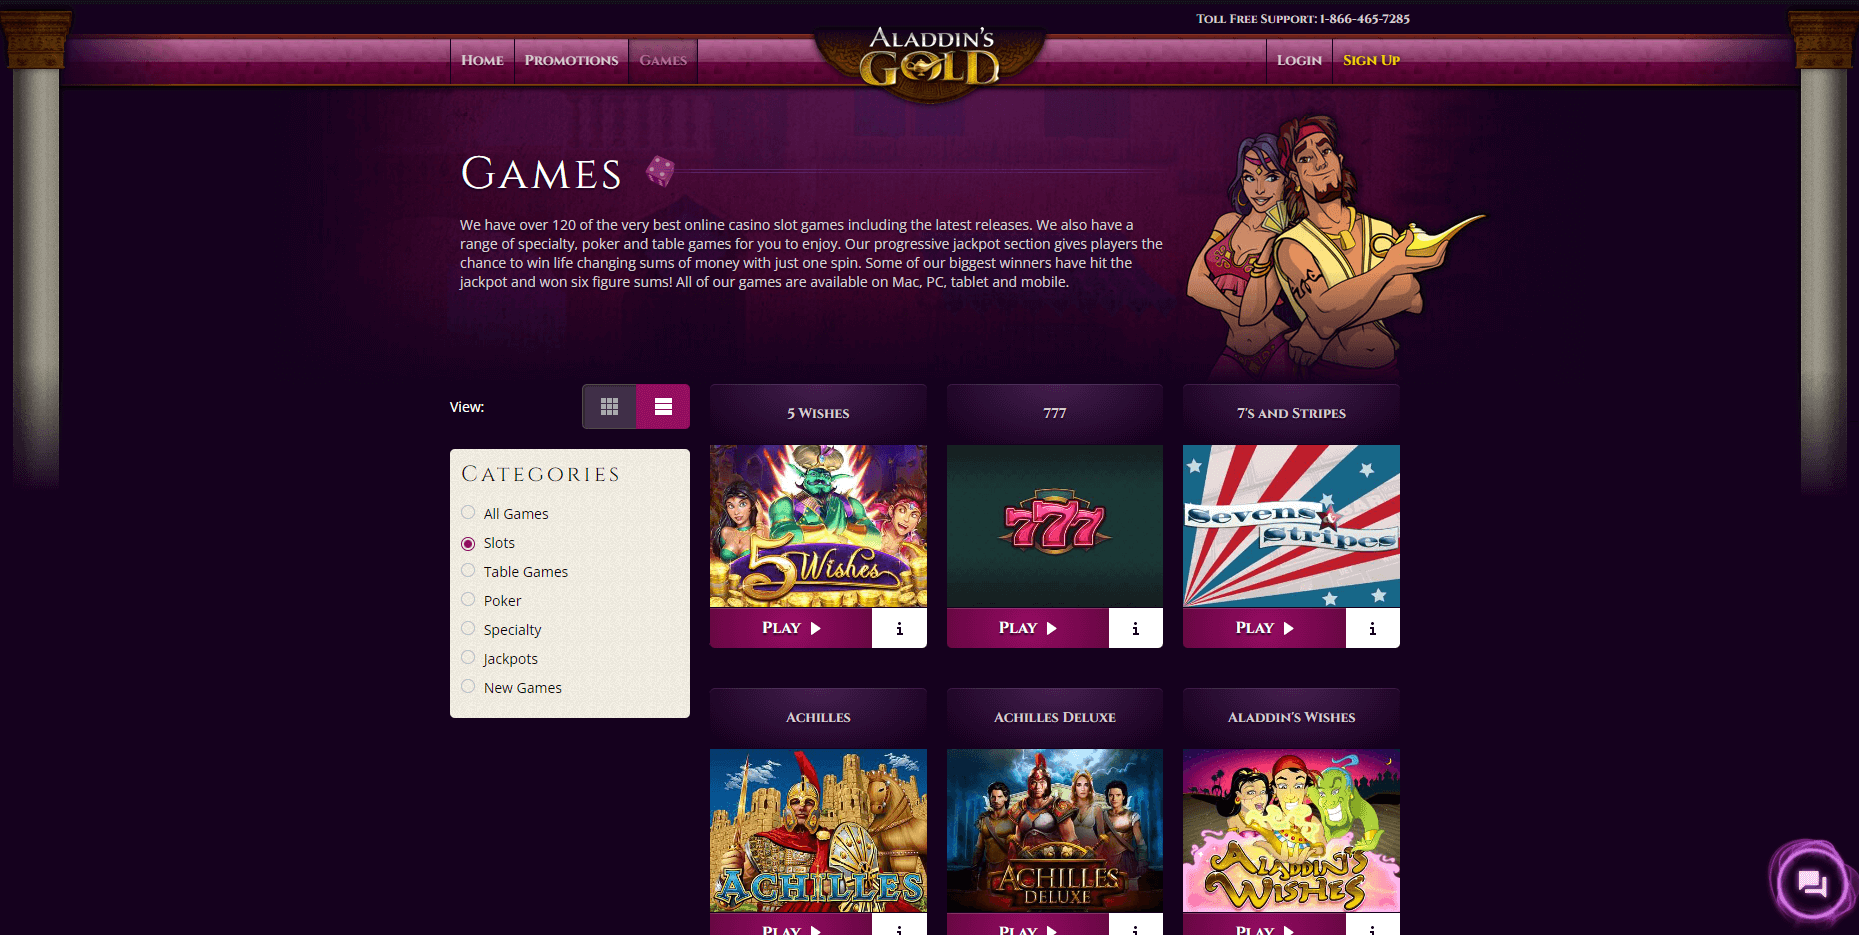 Aladdin's Gold Slots and Games